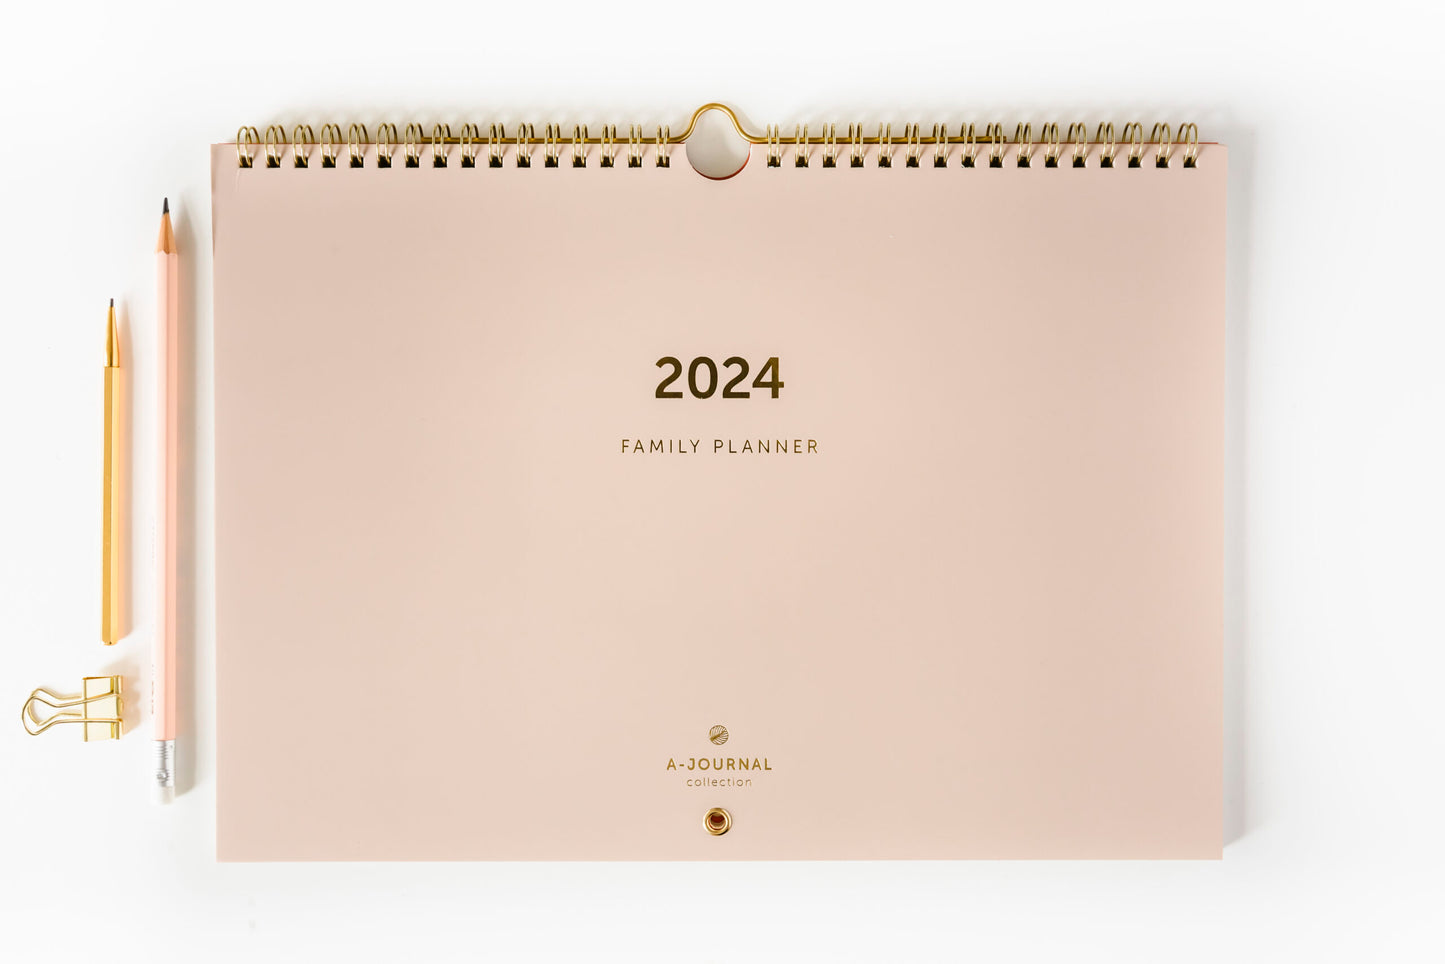 A-Journal Familieplanner 2024